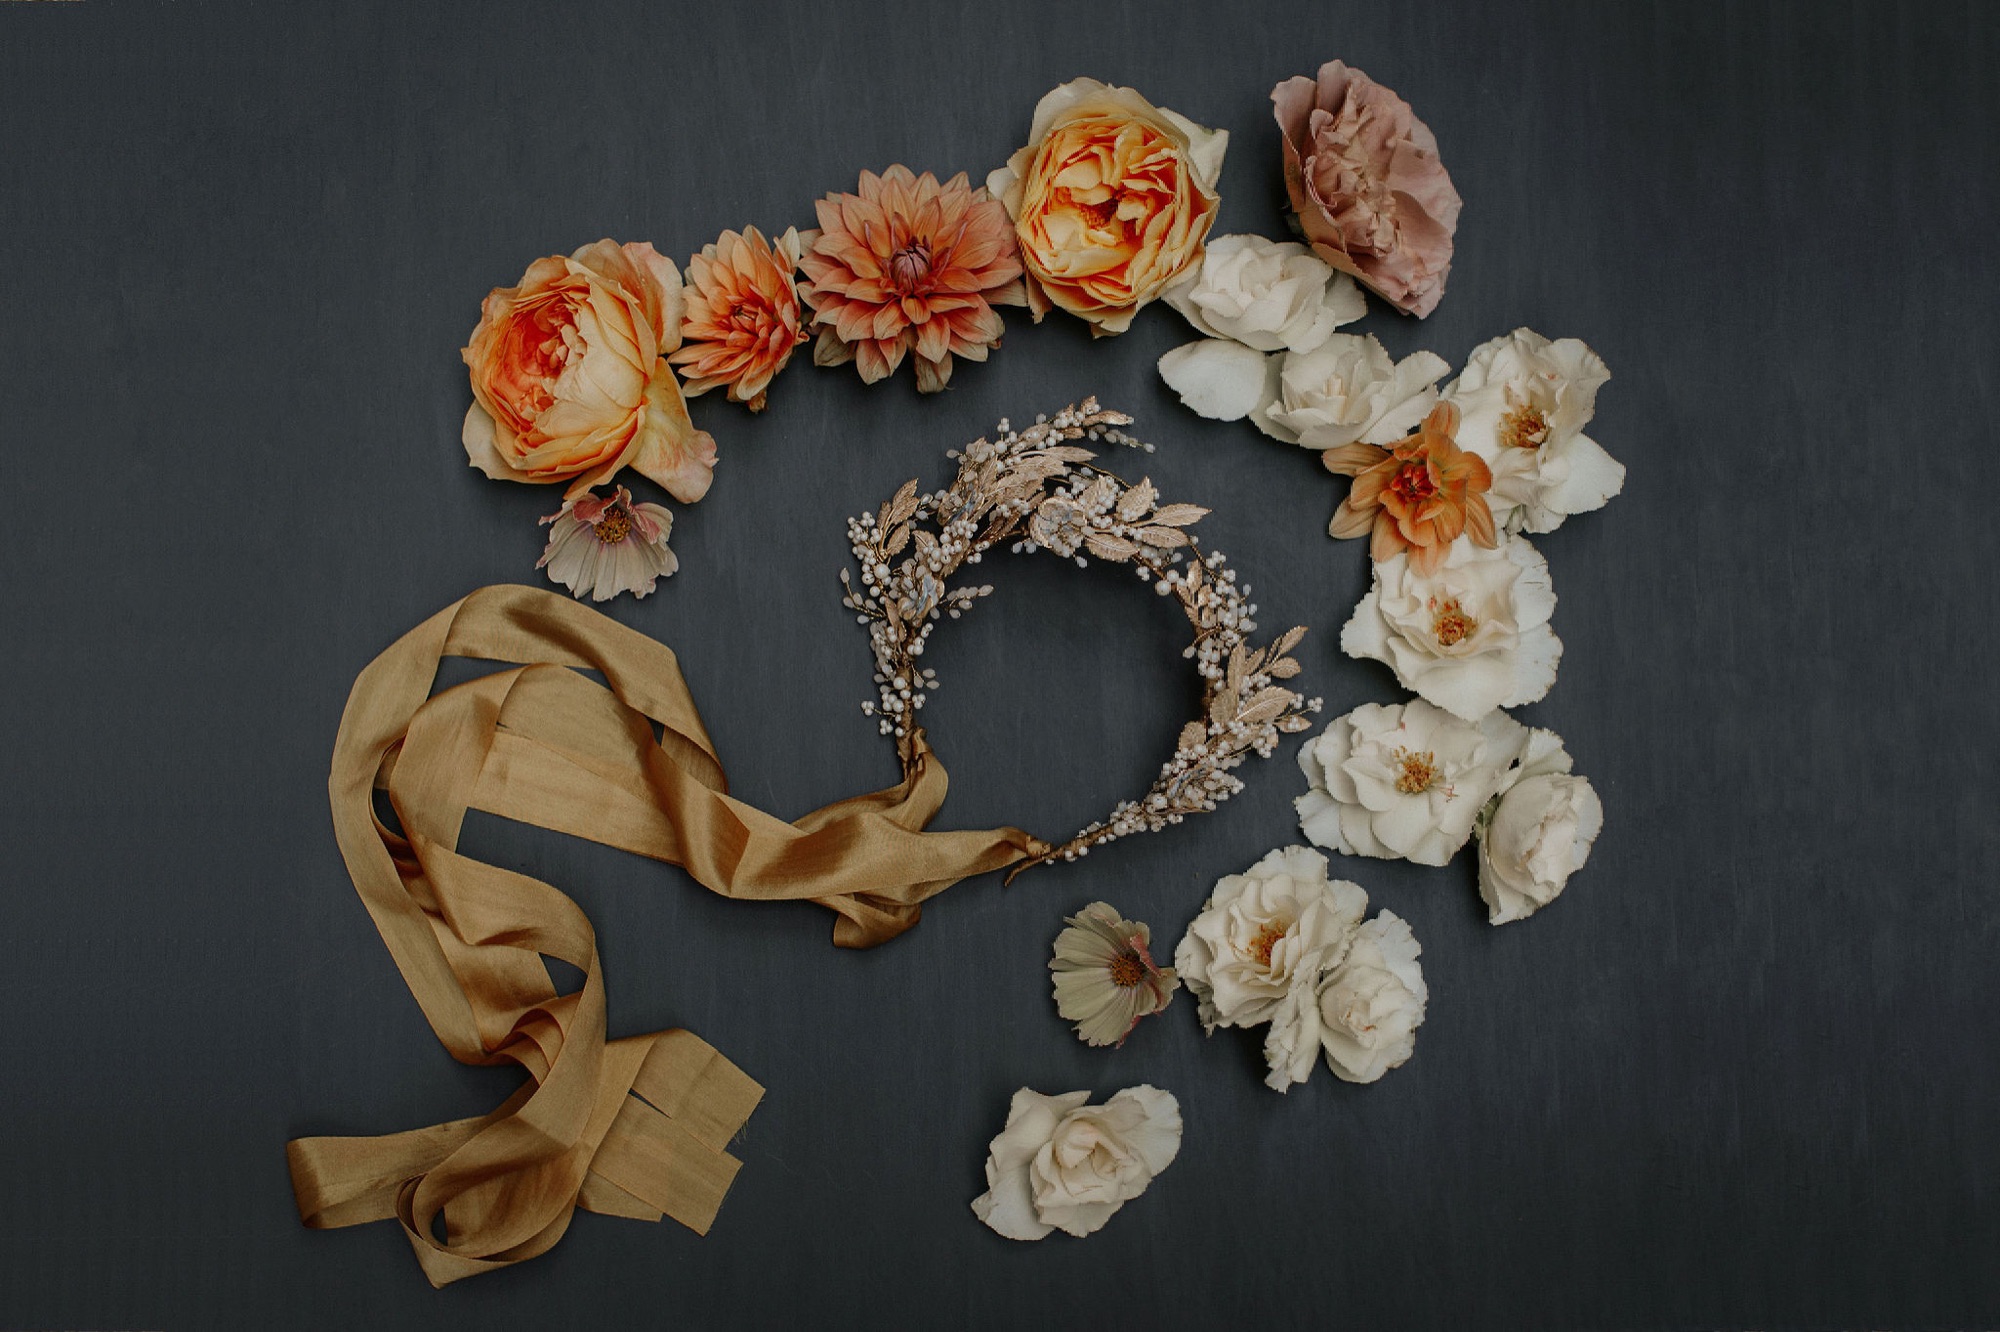 Handmade floral bridal crown by Clare Lloyd Accessories Image by Oxi Photography